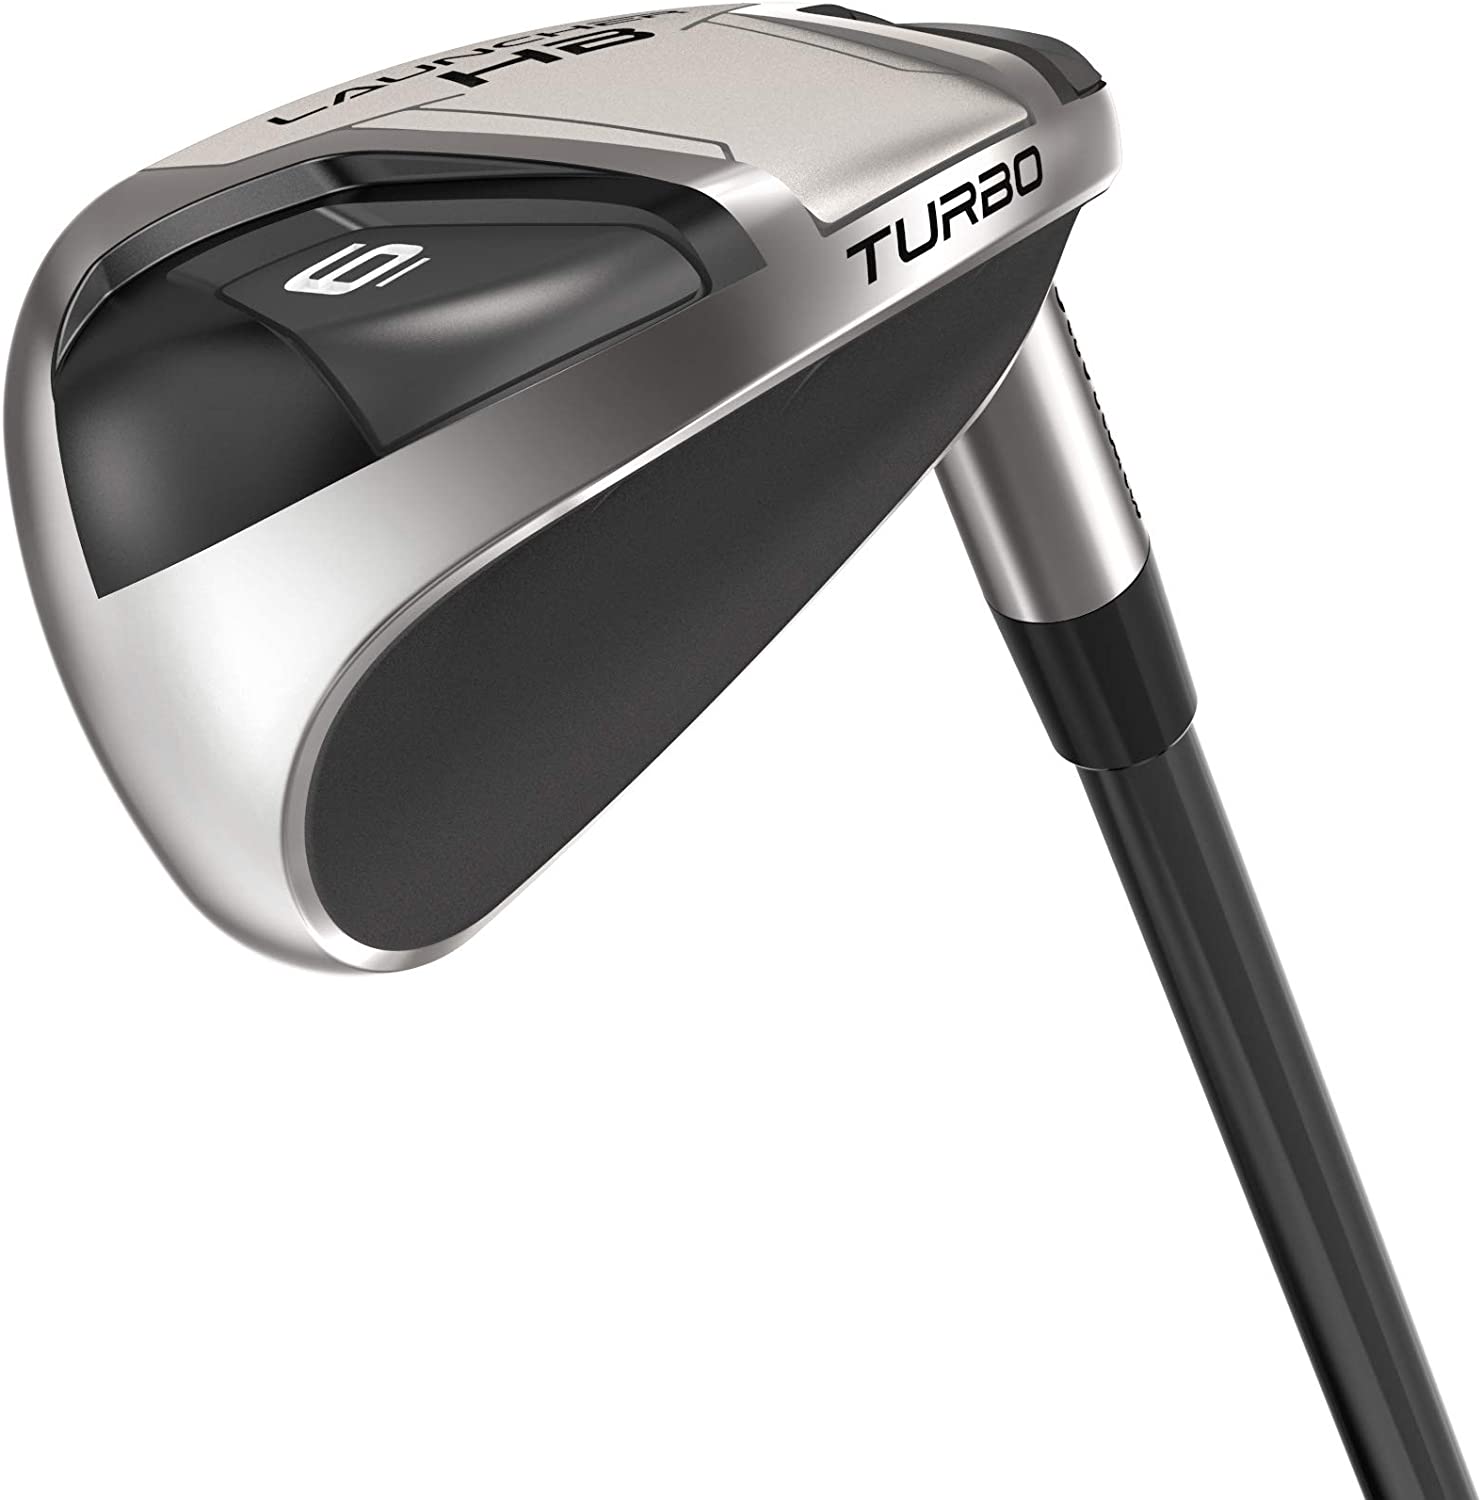 what are the best golf irons for beginners?